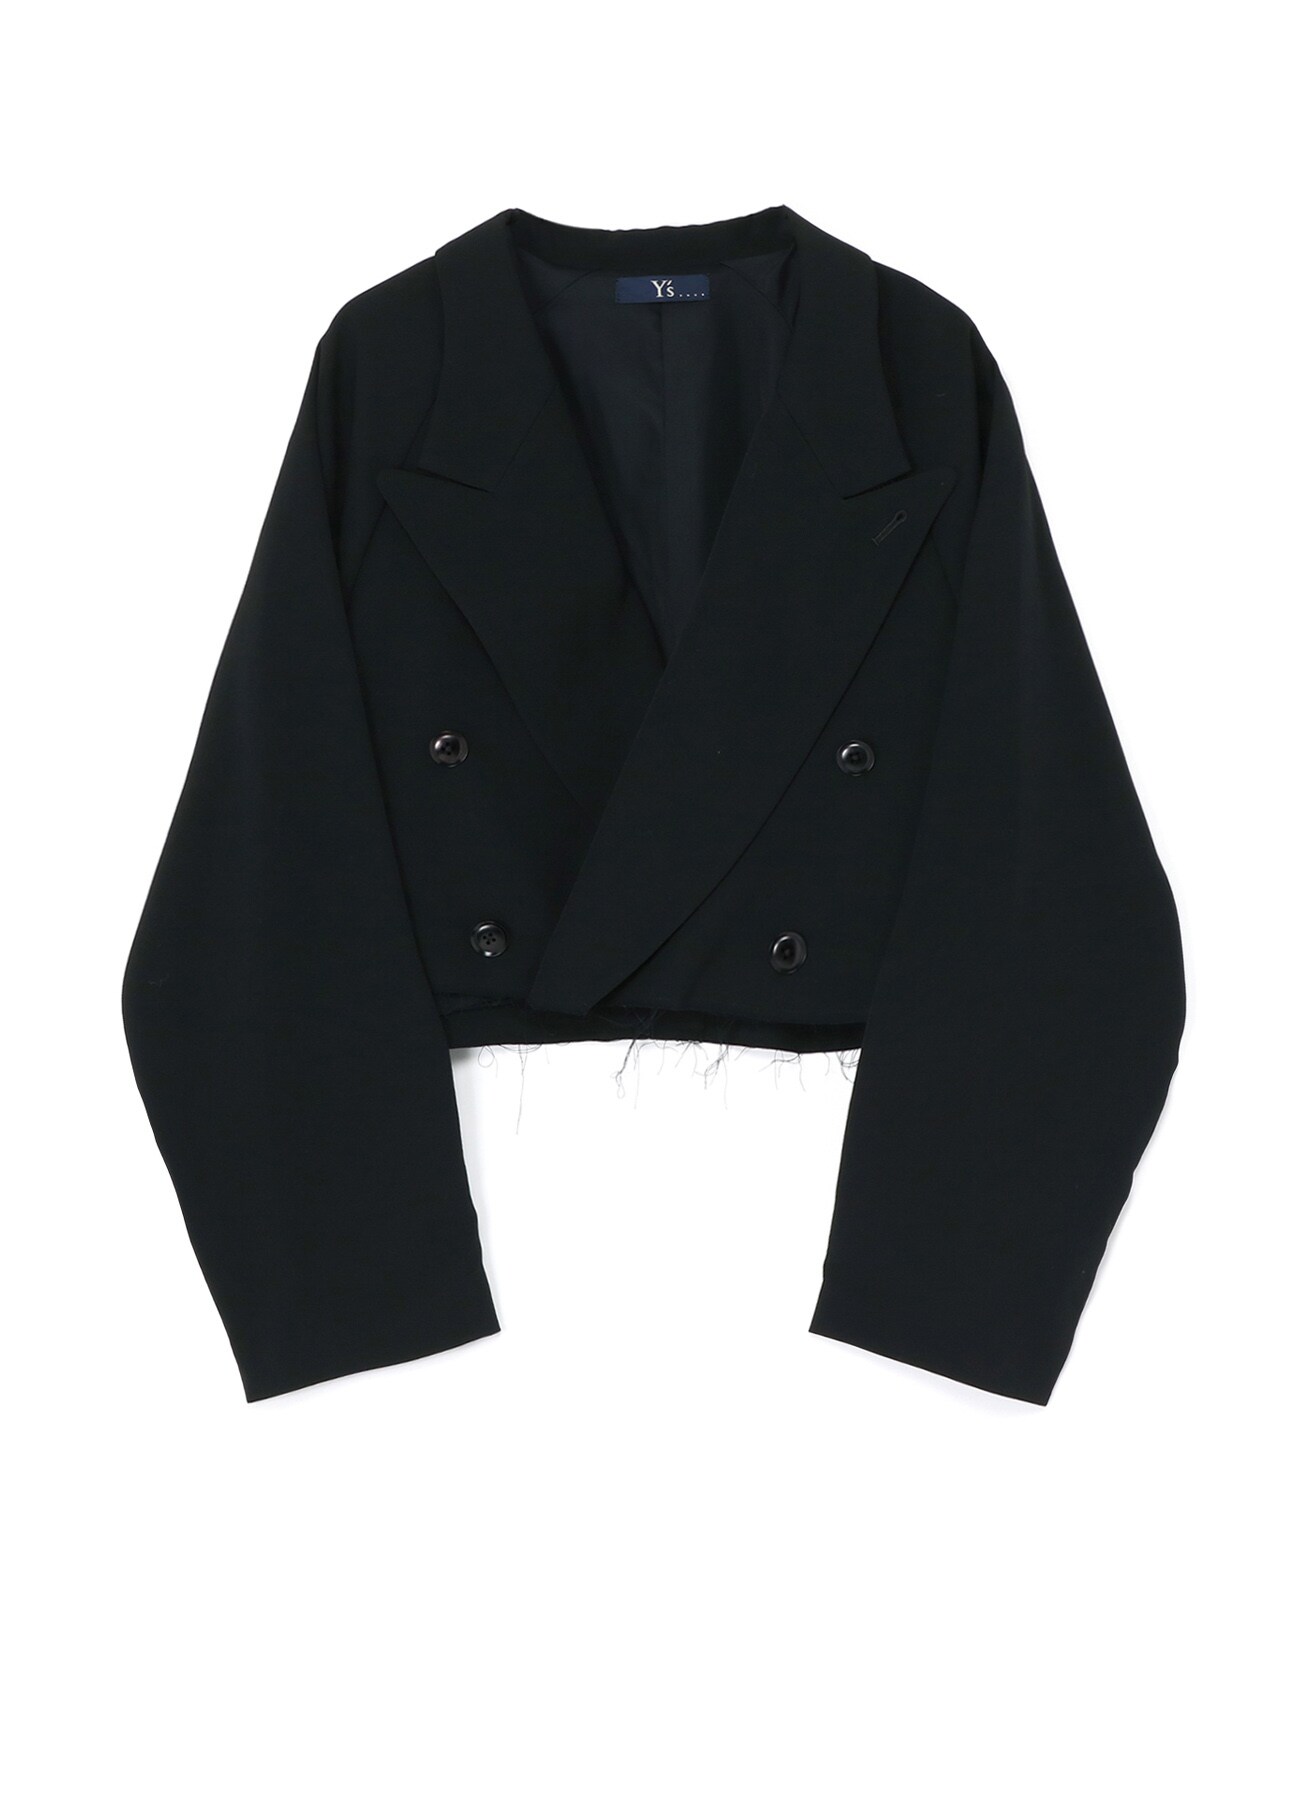 OUTERWEAR ｜Y's｜ [Official] THE SHOP YOHJI YAMAMOTO (3/3 page)